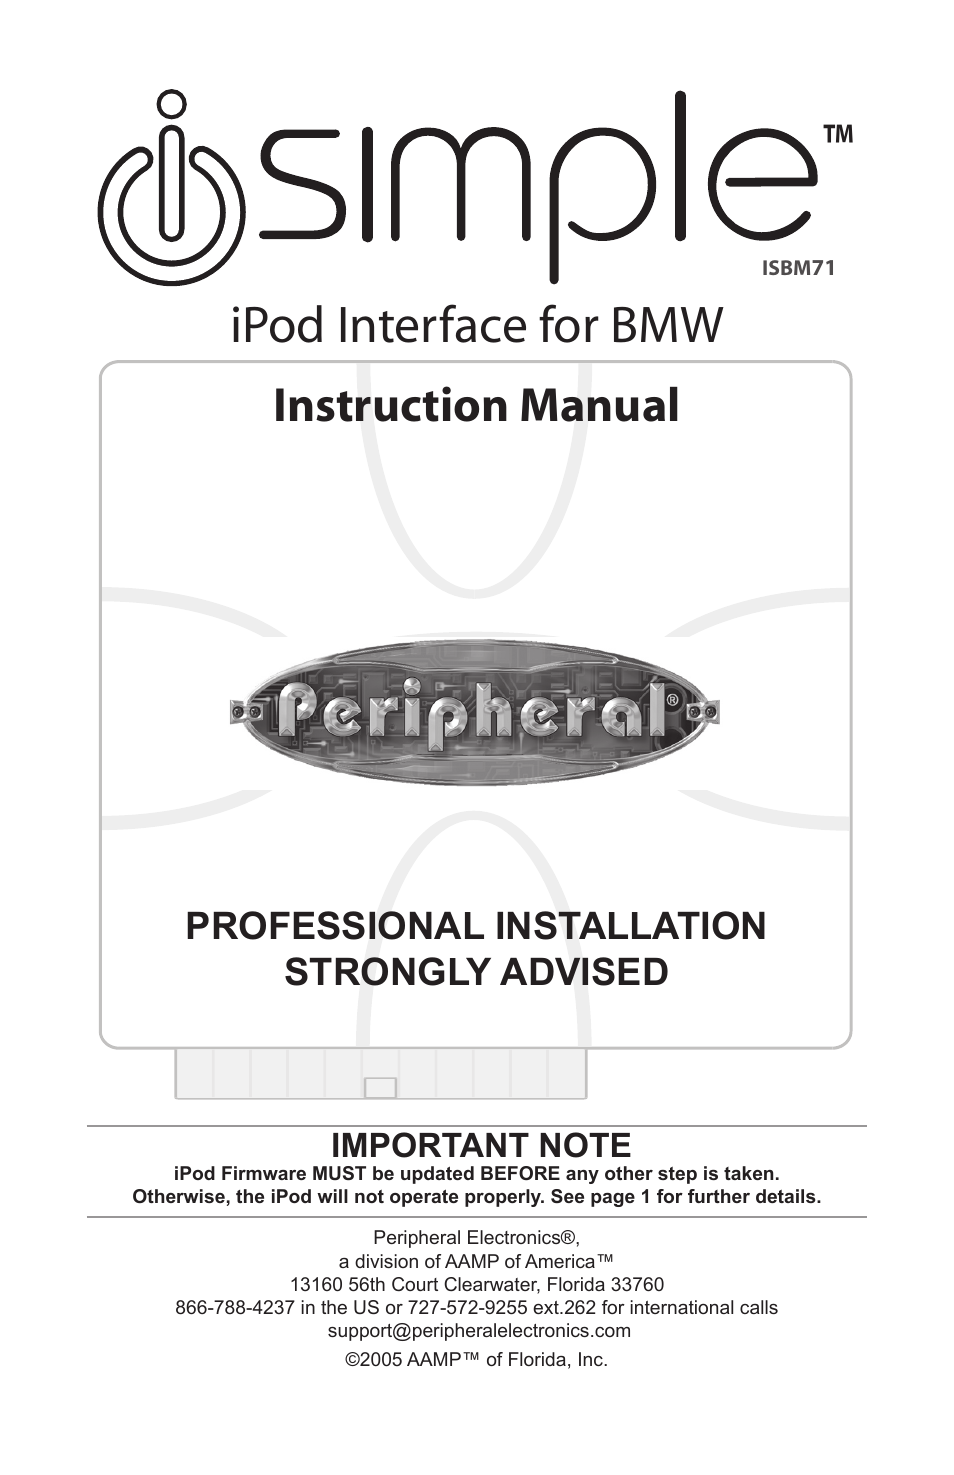 Peripheral Simple iPod Interface for BMW